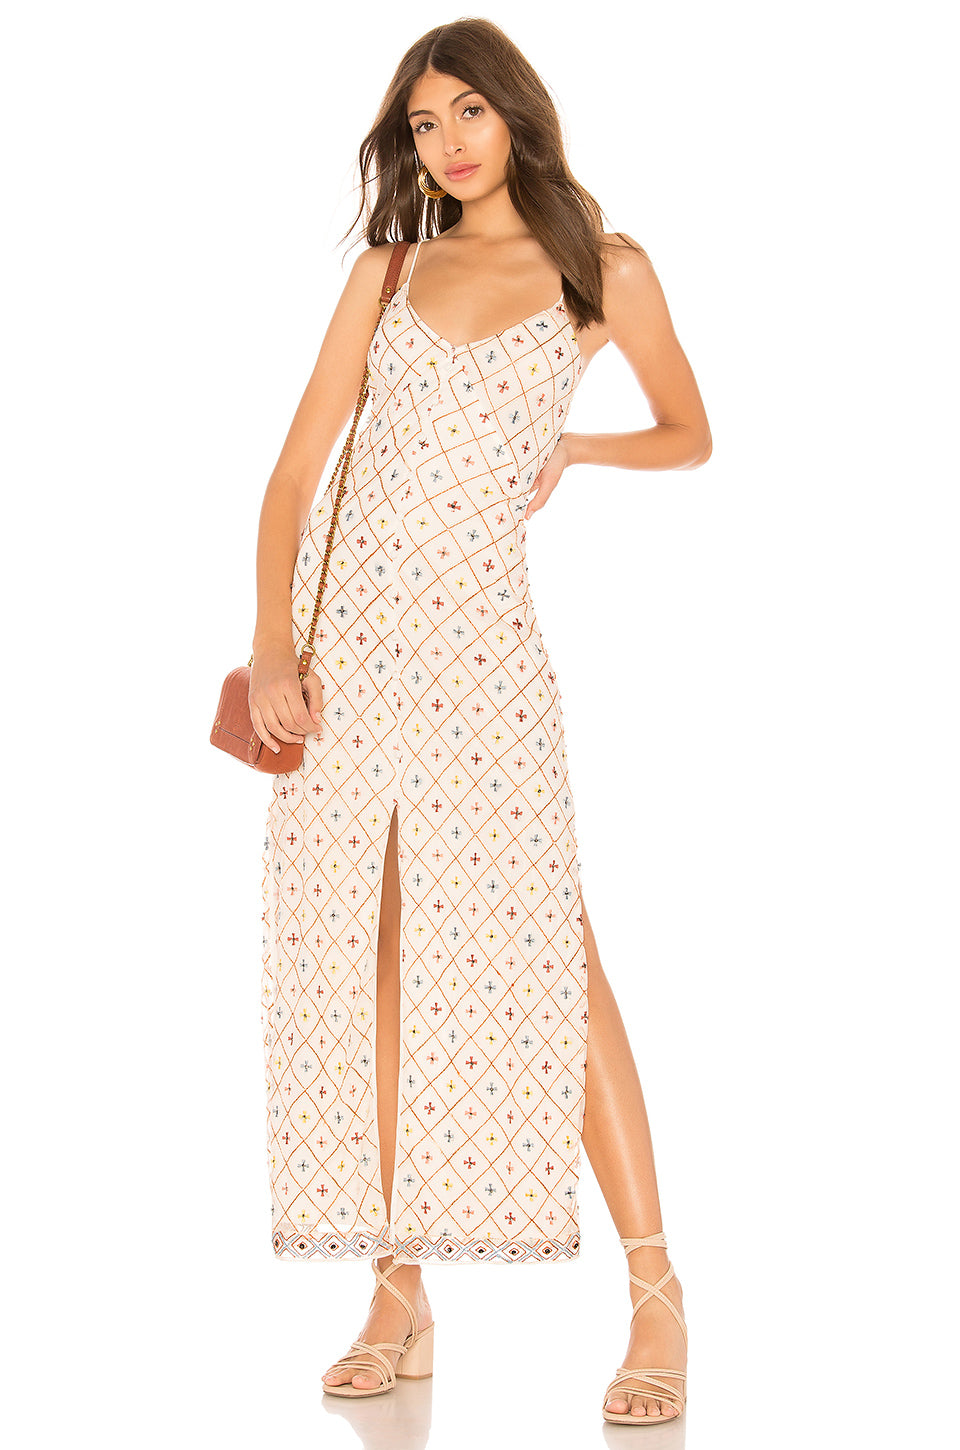 Linda Embroidered Dress in CREAM